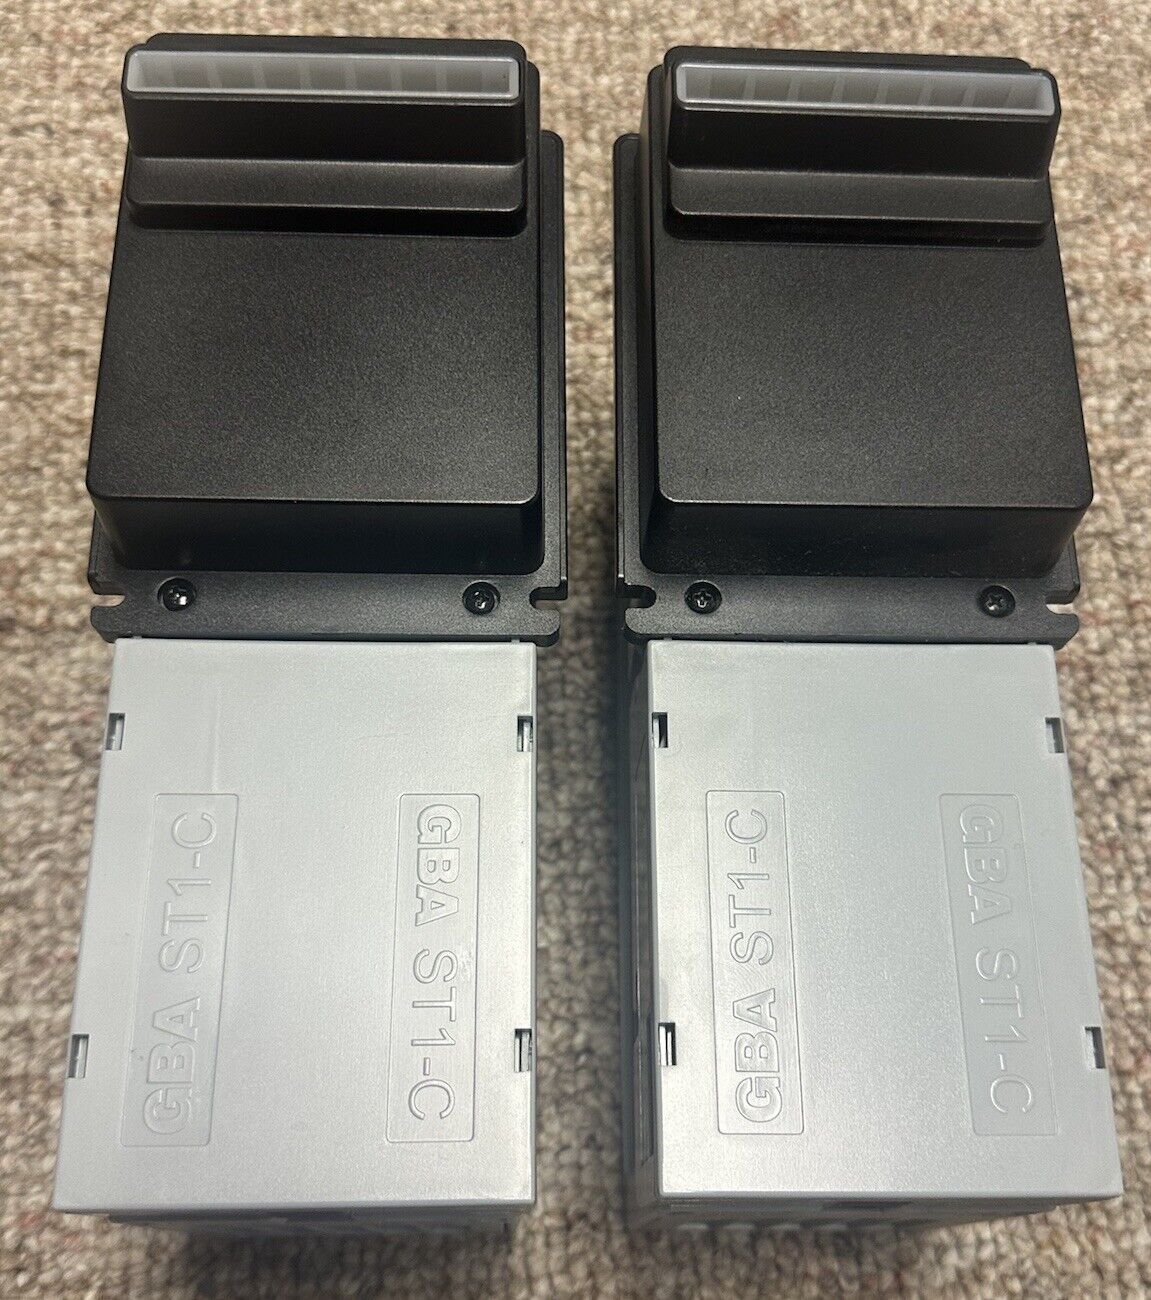 Lot of (2) Astrosys GBA ST1-C Bill Acceptors - TESTED & WORKING - SKILL GAMES